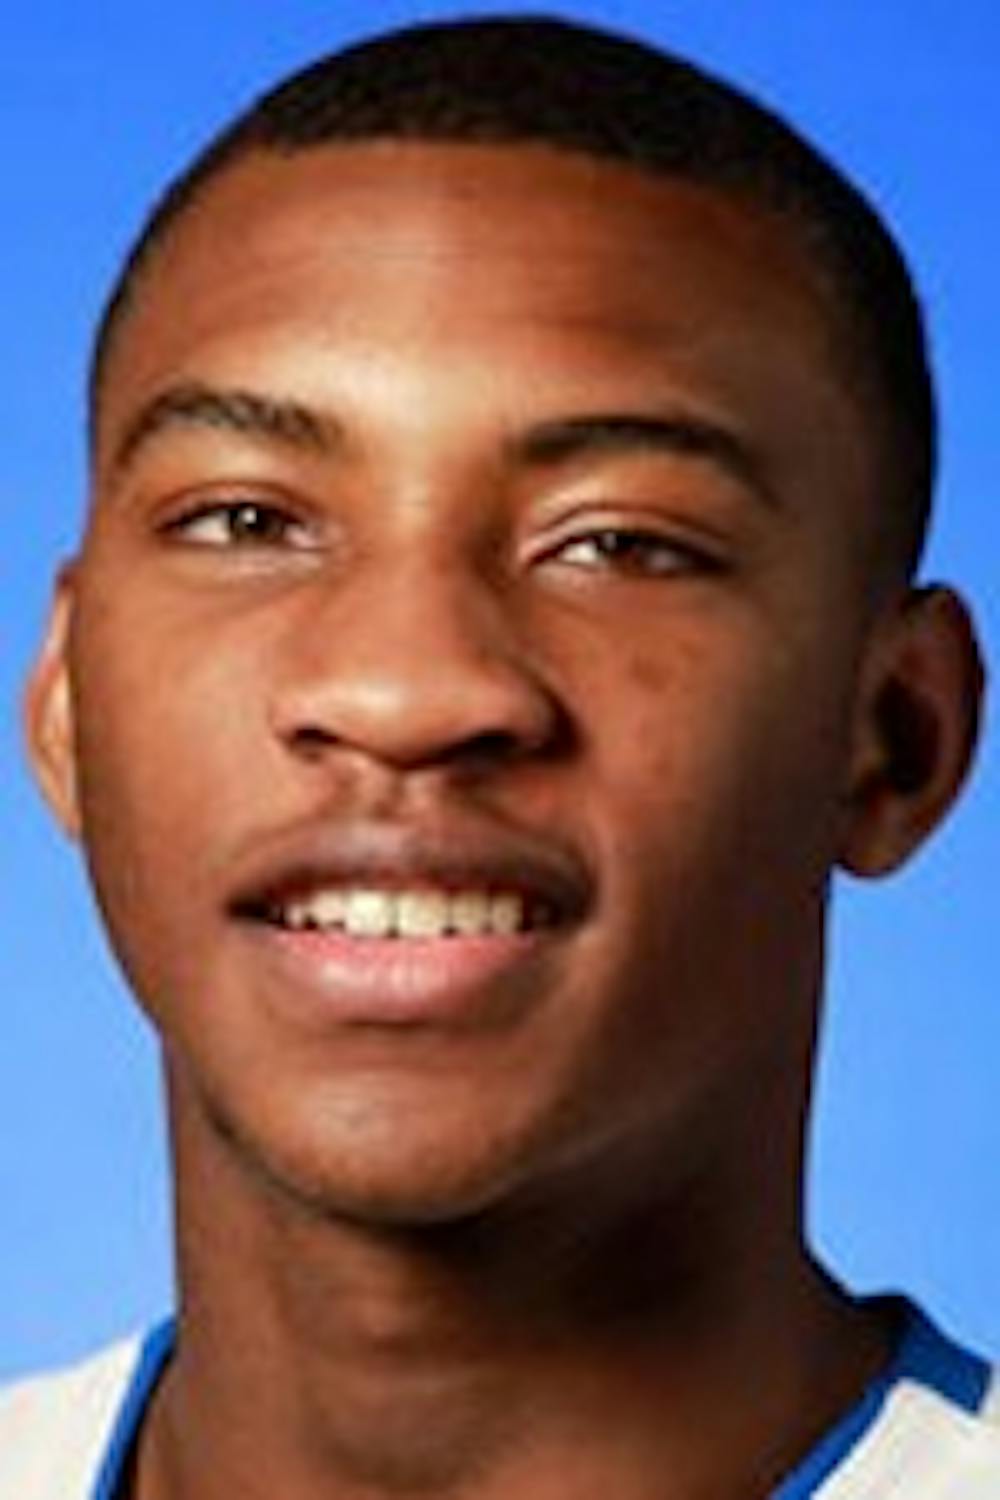 	<p>Duke guard <strong>Rasheed Sulaimon</strong> vs. <span class="caps">MSU</span> guard/forward <strong>Branden Dawson</strong></p>

	<p>This should be a tough matchup for Dawson, trying to stay in front of the much smaller and quicker Sulaimon, who also is able to shoot the ball from distance. Dawson could look to capitalize on his size advantage against Sulaimon — Dawson is two inches taller and 45 pounds heavier — but the Gary, Ind., native hasn’t spent a ton of time in the post this season.</p>

	<p>Advantage: <strong>Duke</strong></p>